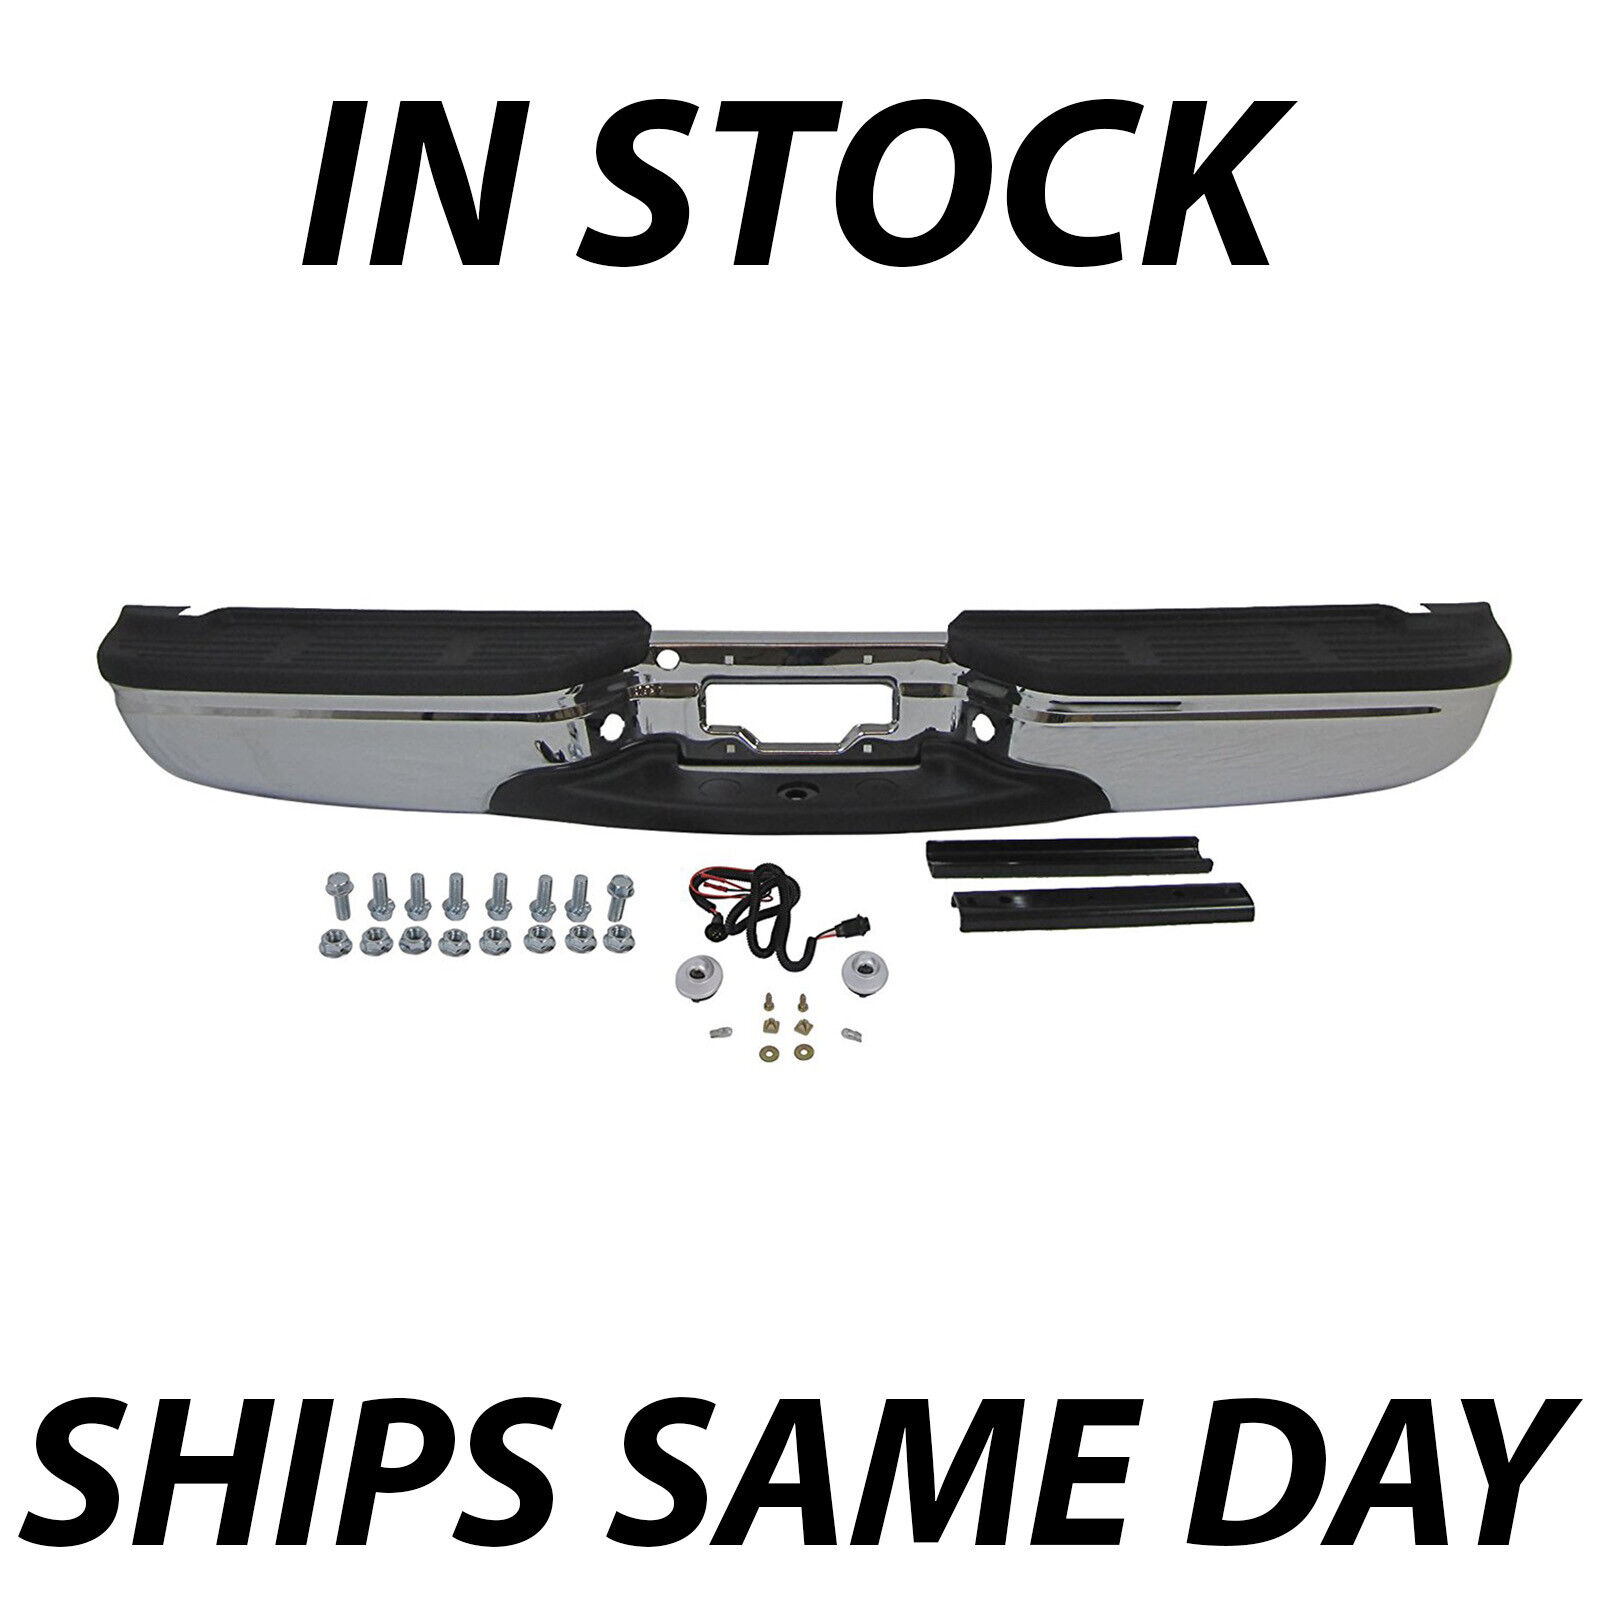 NEW Chrome - Rear Step Bumper Assembly for 1999-2007 Ford F250 F350 Super Duty